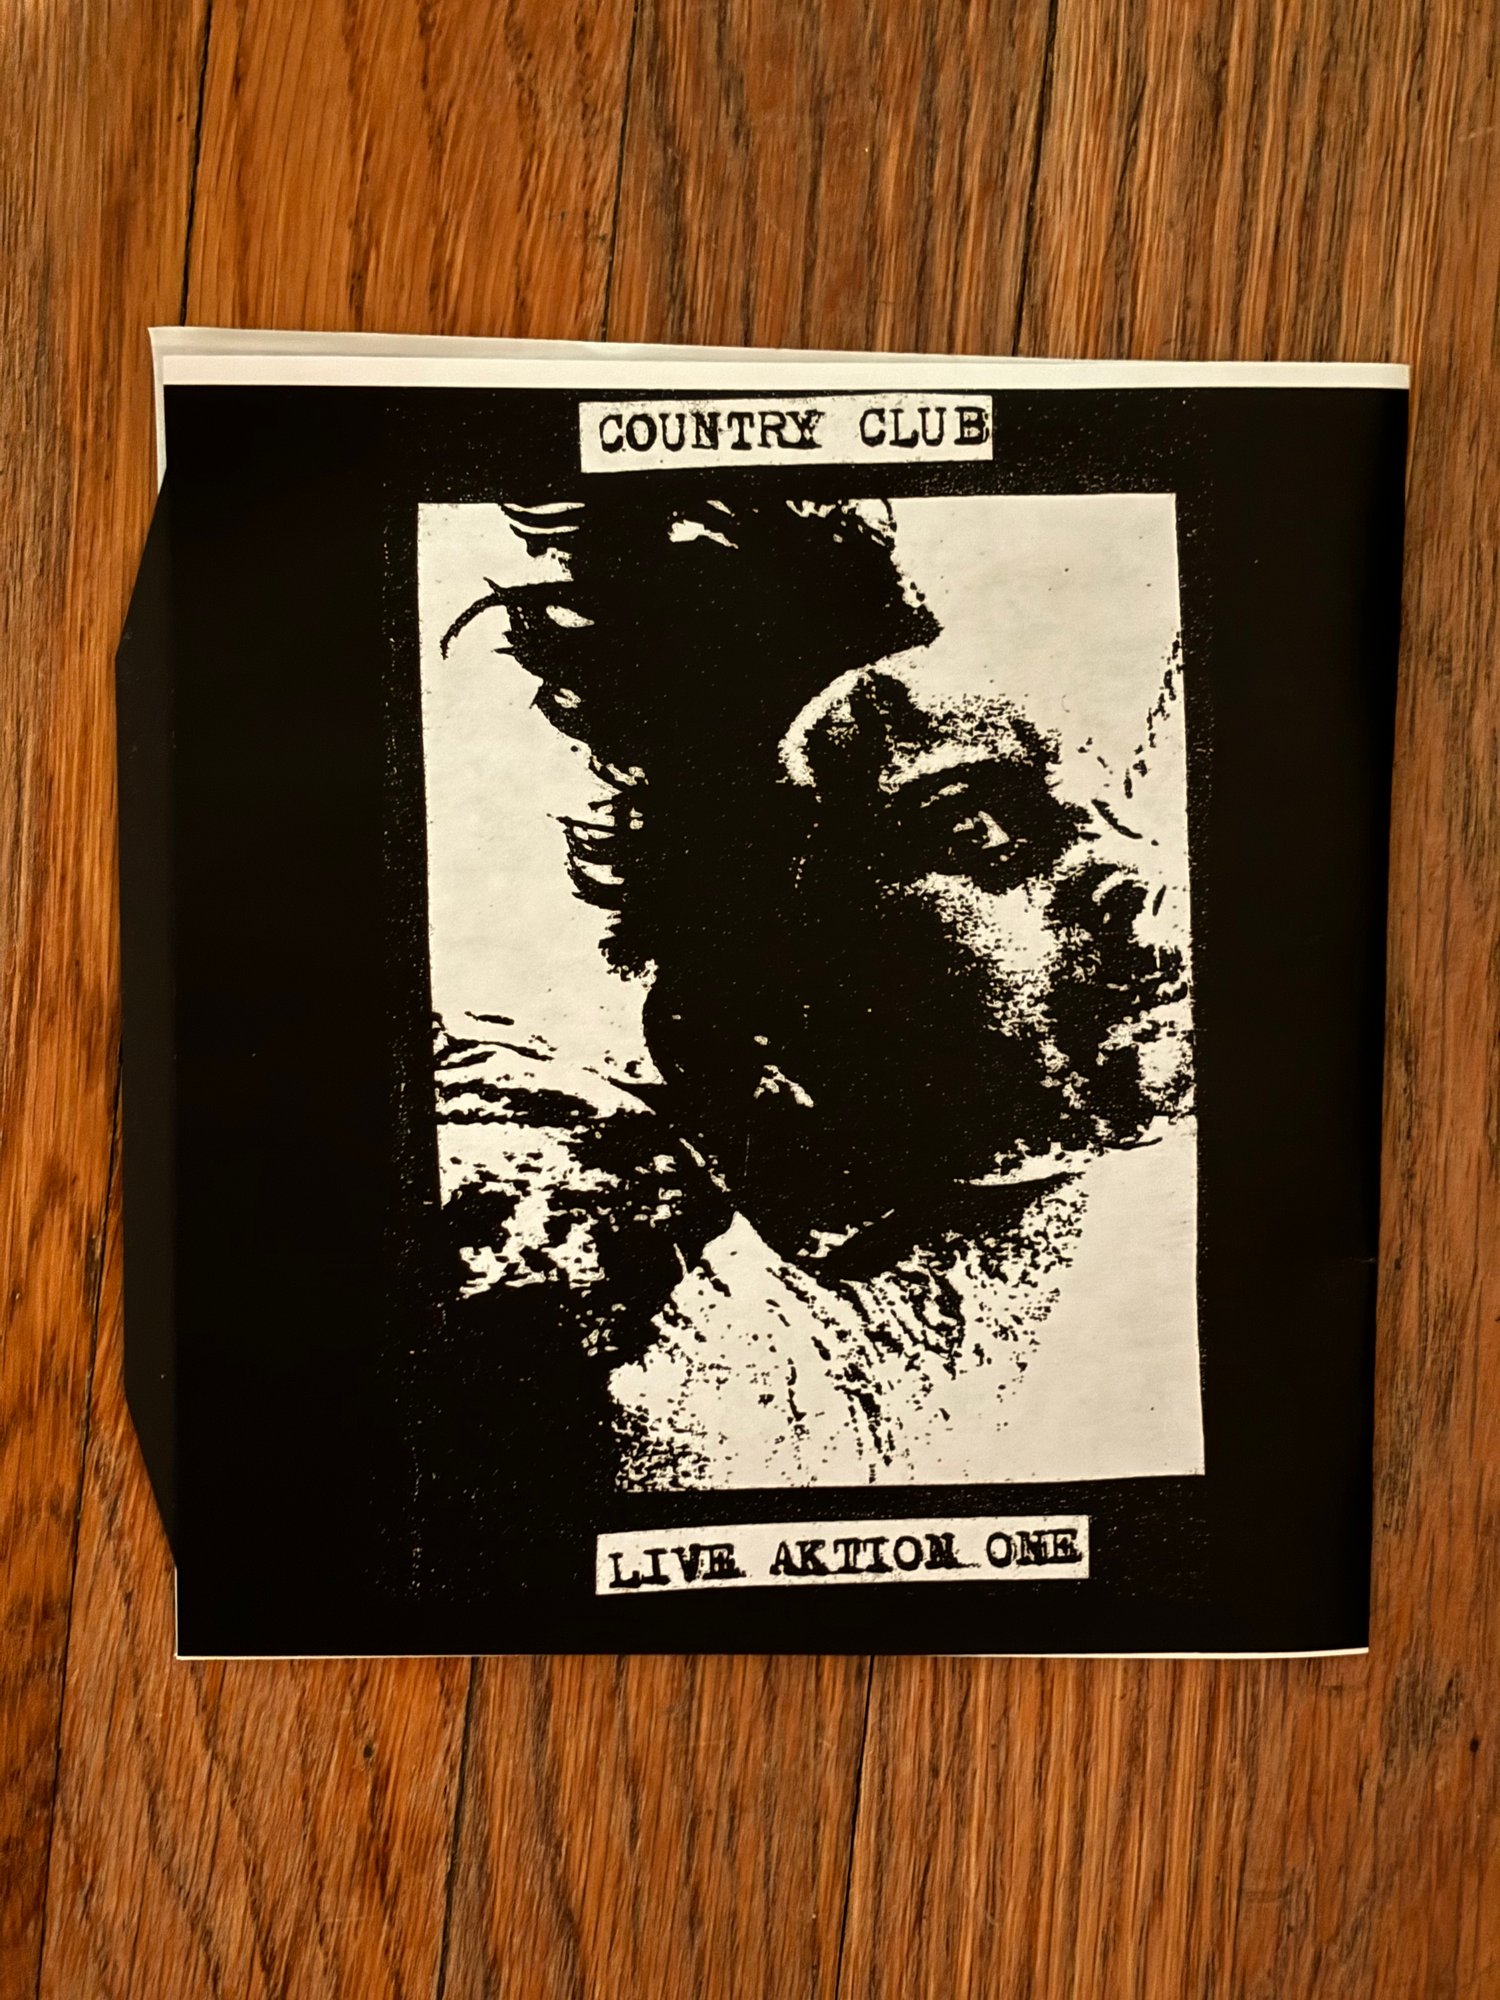 Country Club - Live Aktion One 7" (4 LEFT)